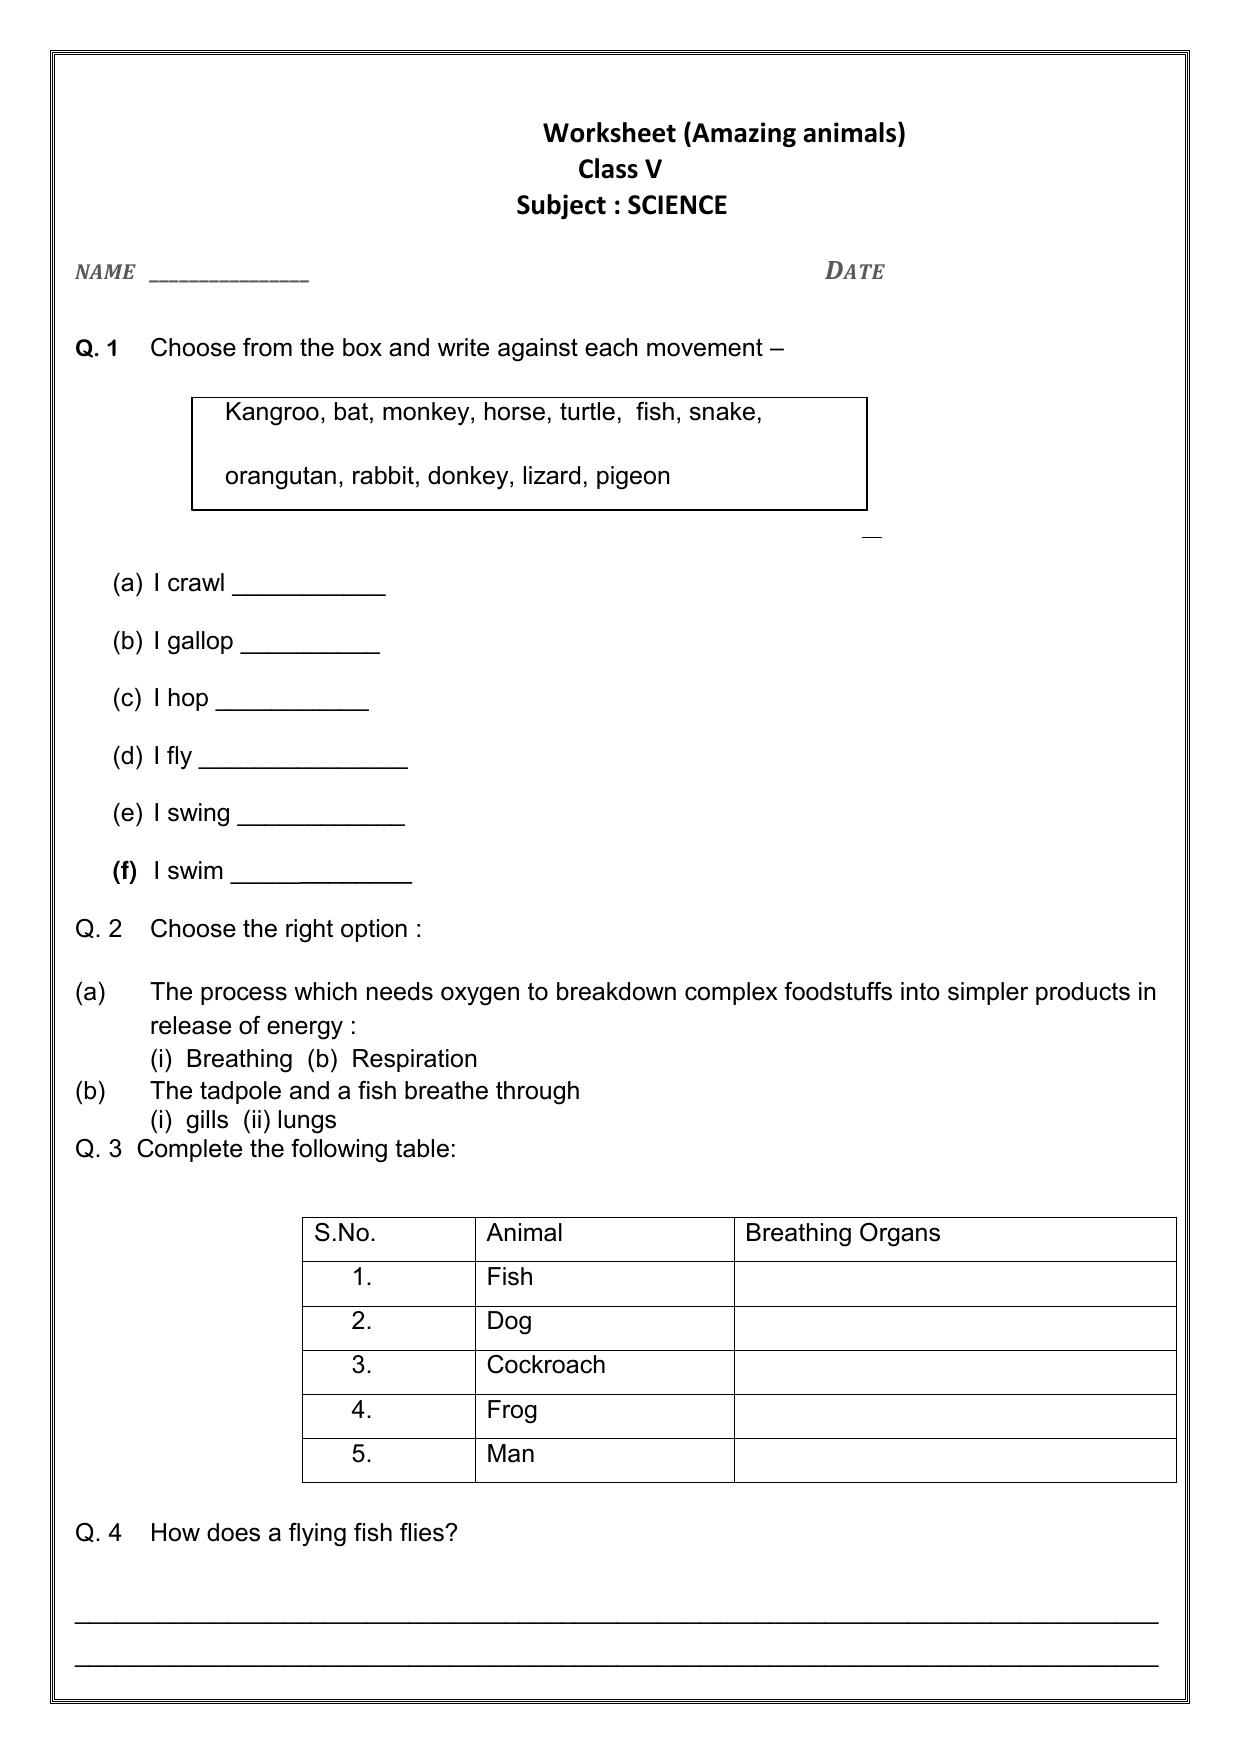 Worksheet for Class 5 Science Amazing Animals Assignment 33 - Page 1